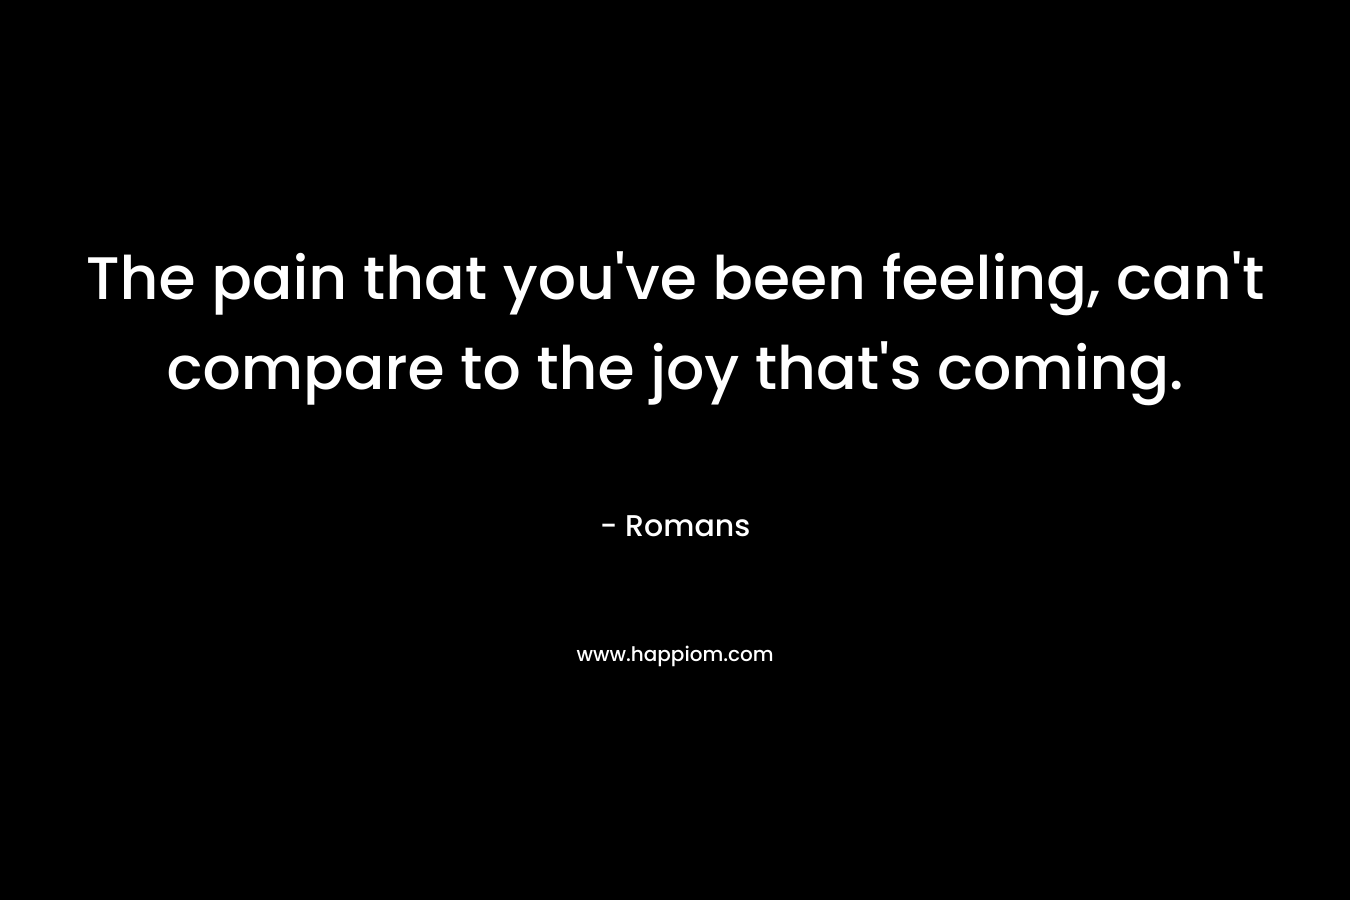 The pain that you’ve been feeling, can’t compare to the joy that’s coming. – Romans